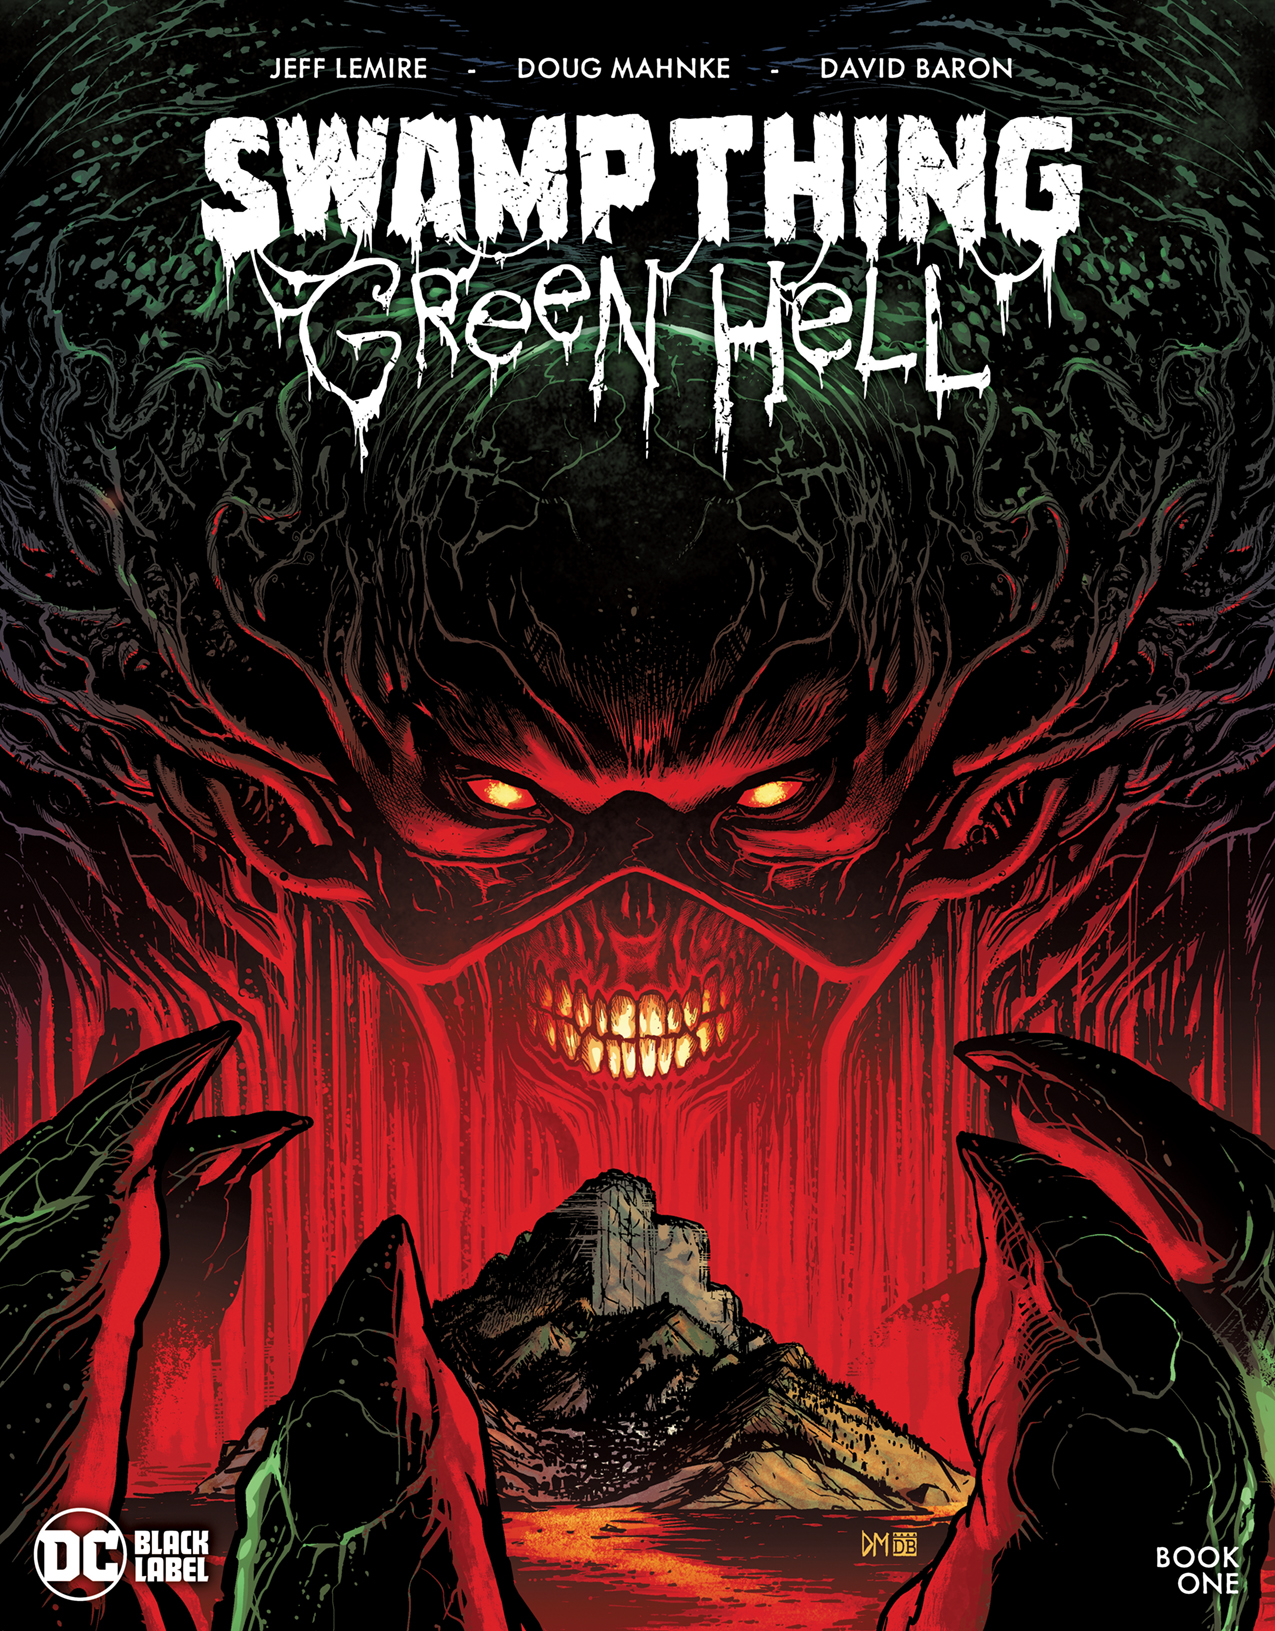 Swamp Thing Green Hell #1 Cover A Doug Mahnke (Mature) (Of 3)